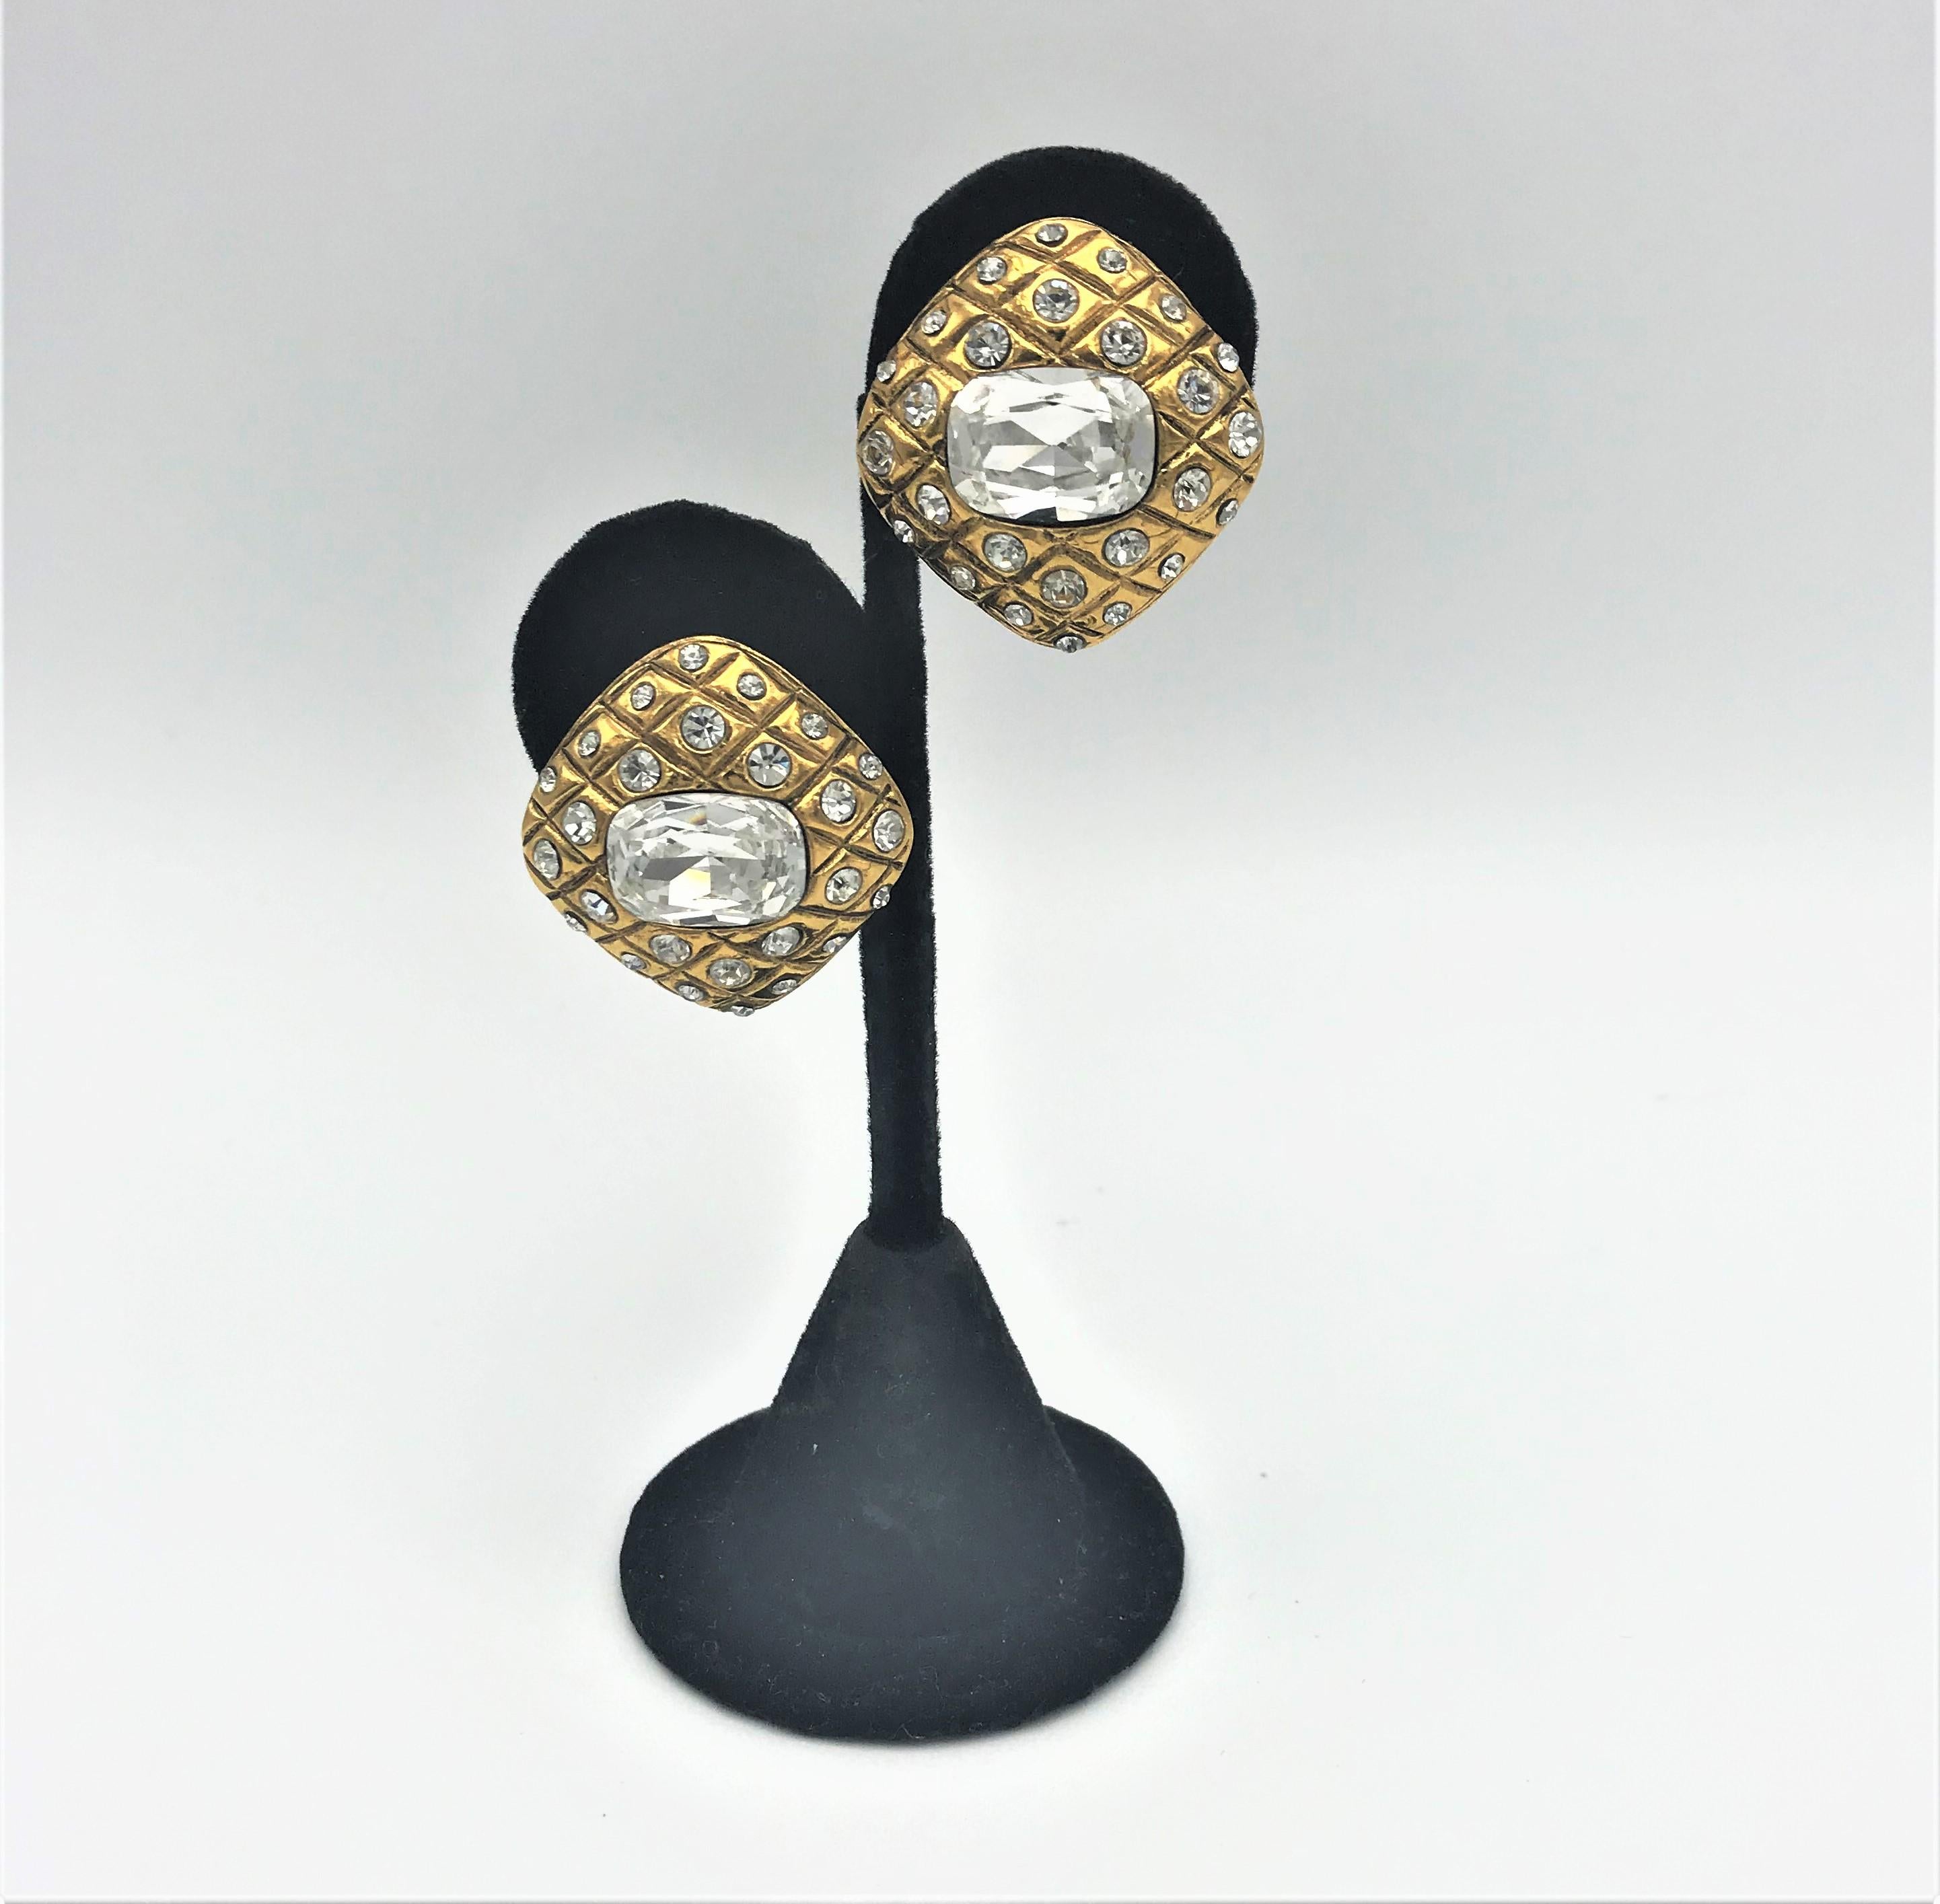 ABOUT
 
Iconic Chanel clip-on earrings, from the 1st collection by Victoire de Castellane. quilted with small rhinestones in between. In the middle there is a large rectangular cut rhinestone. Gold plated. 
Measurement: Size 3 cm x 3 cm, rectangular